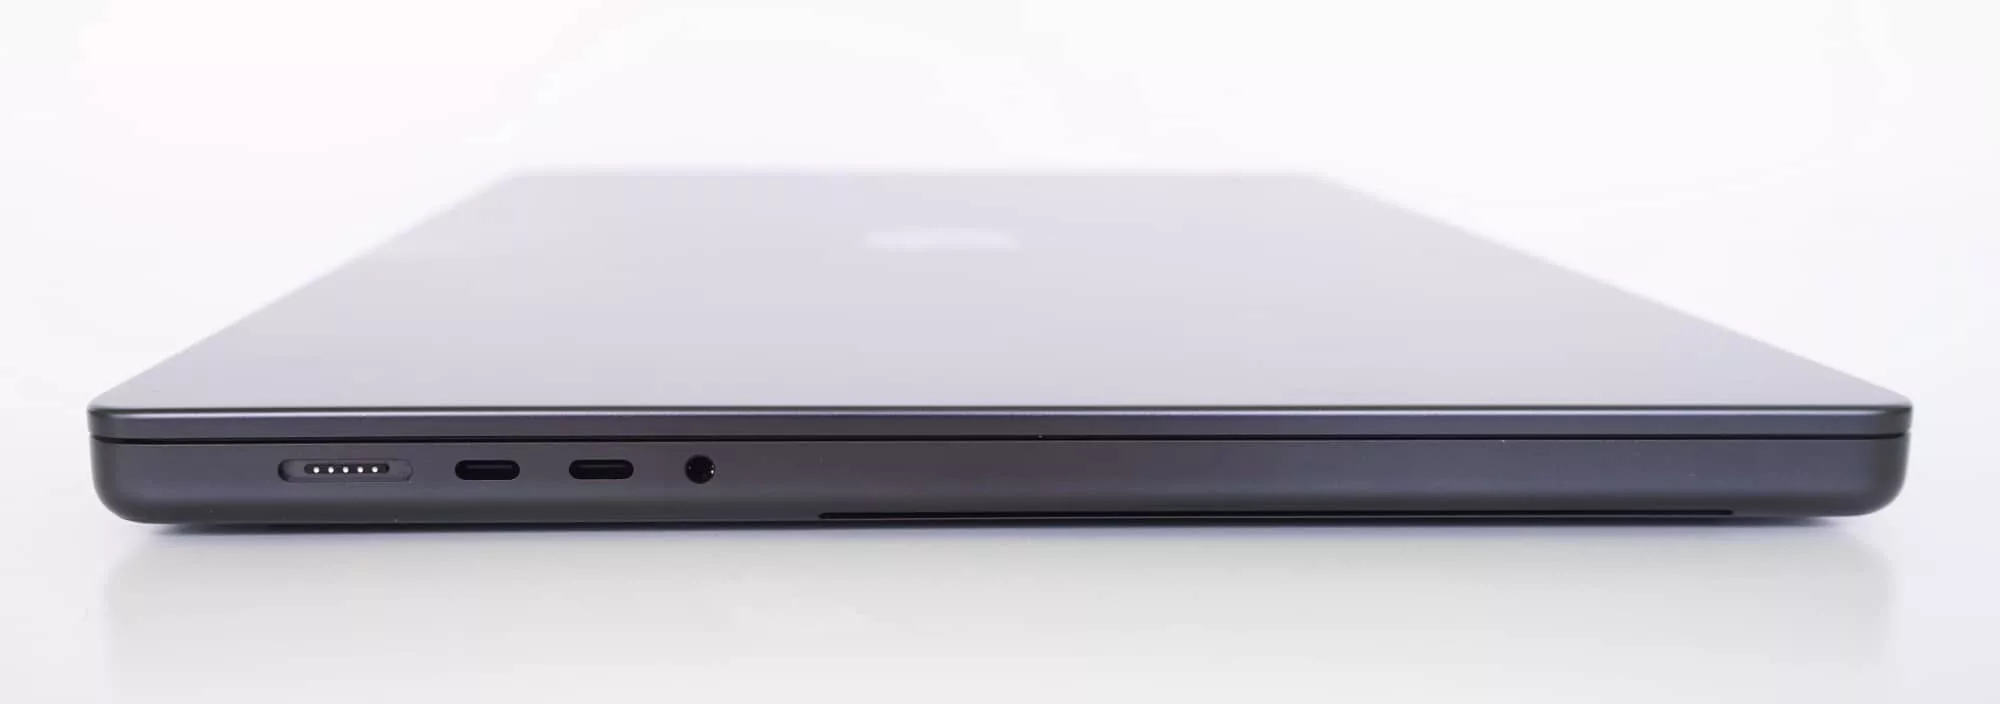 The left side of the MBP 16 with the MagSafe port, two Type C Thunderbolt 4 ports, and a 3.5mm headset jack.